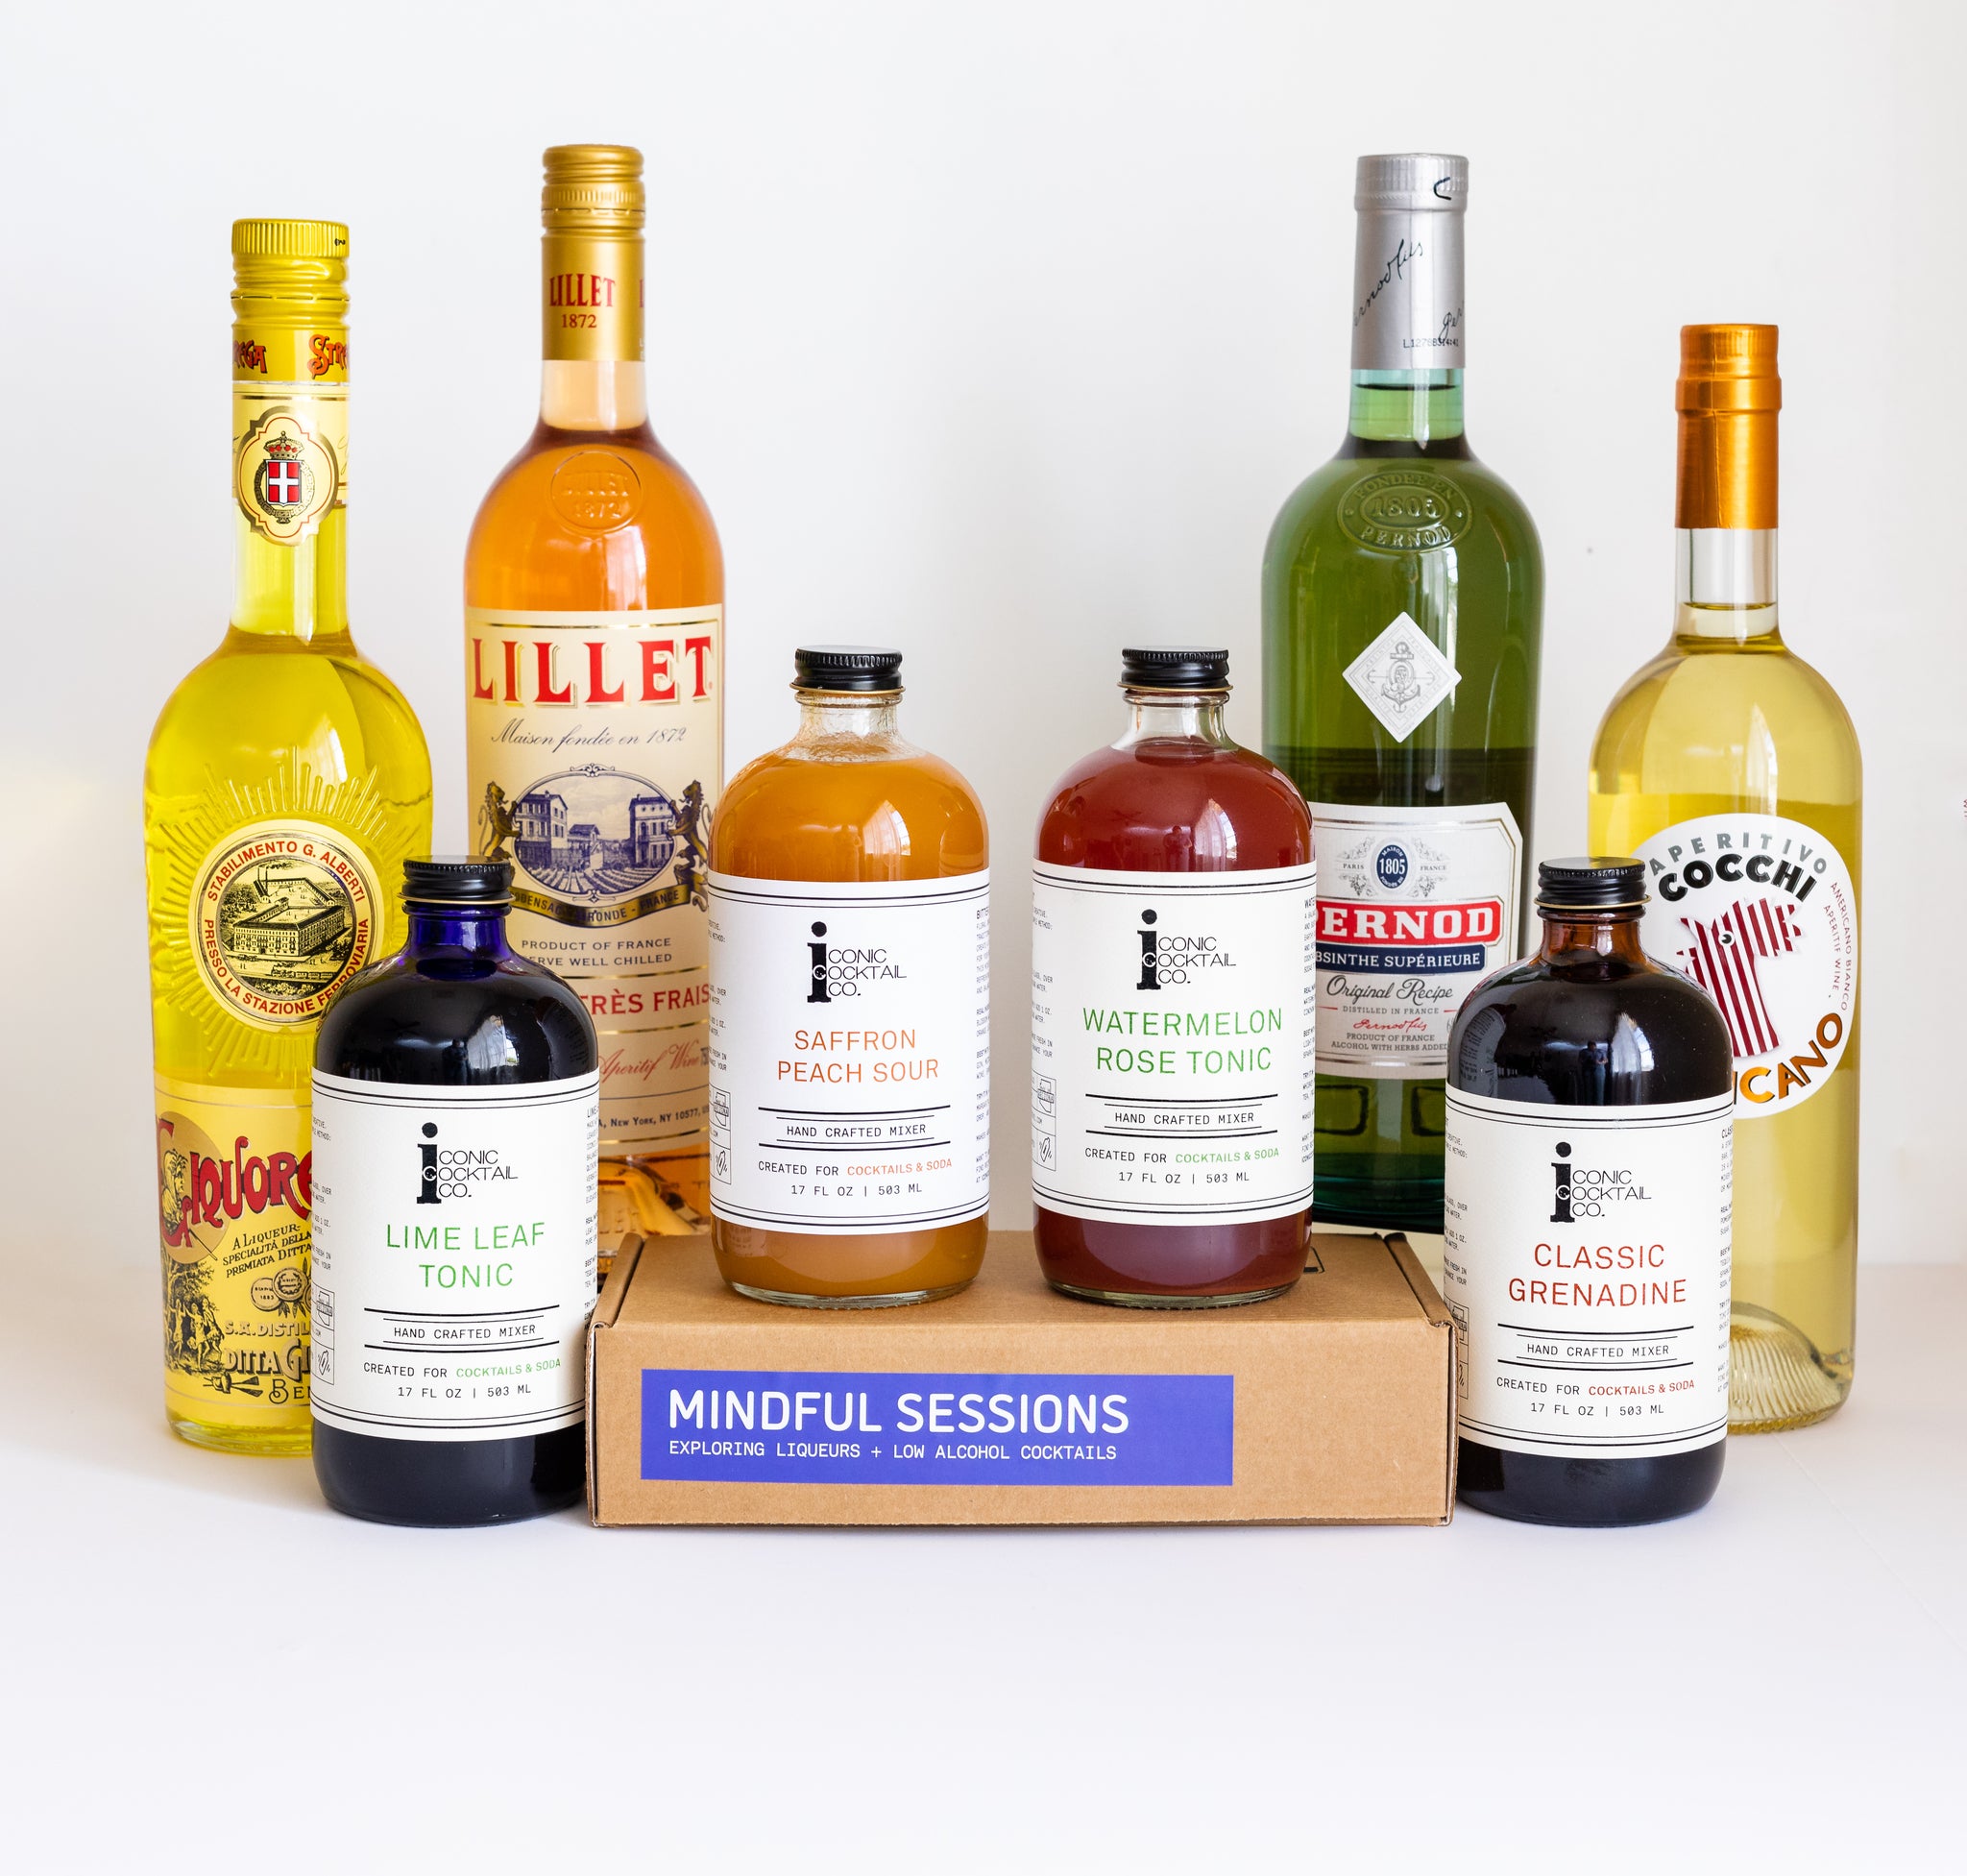 A fun way to sip and explore new cocktails at home is in the Iconic Spirit Packs. Enjoy four mixers expertly curated to pair with your favorite spirits or explore new cocktail styles. Each pack contains a combo of small-batch seasonals and signature flavors bundled with one-of-a-kind recipes created in-house by our expert mixologist. 